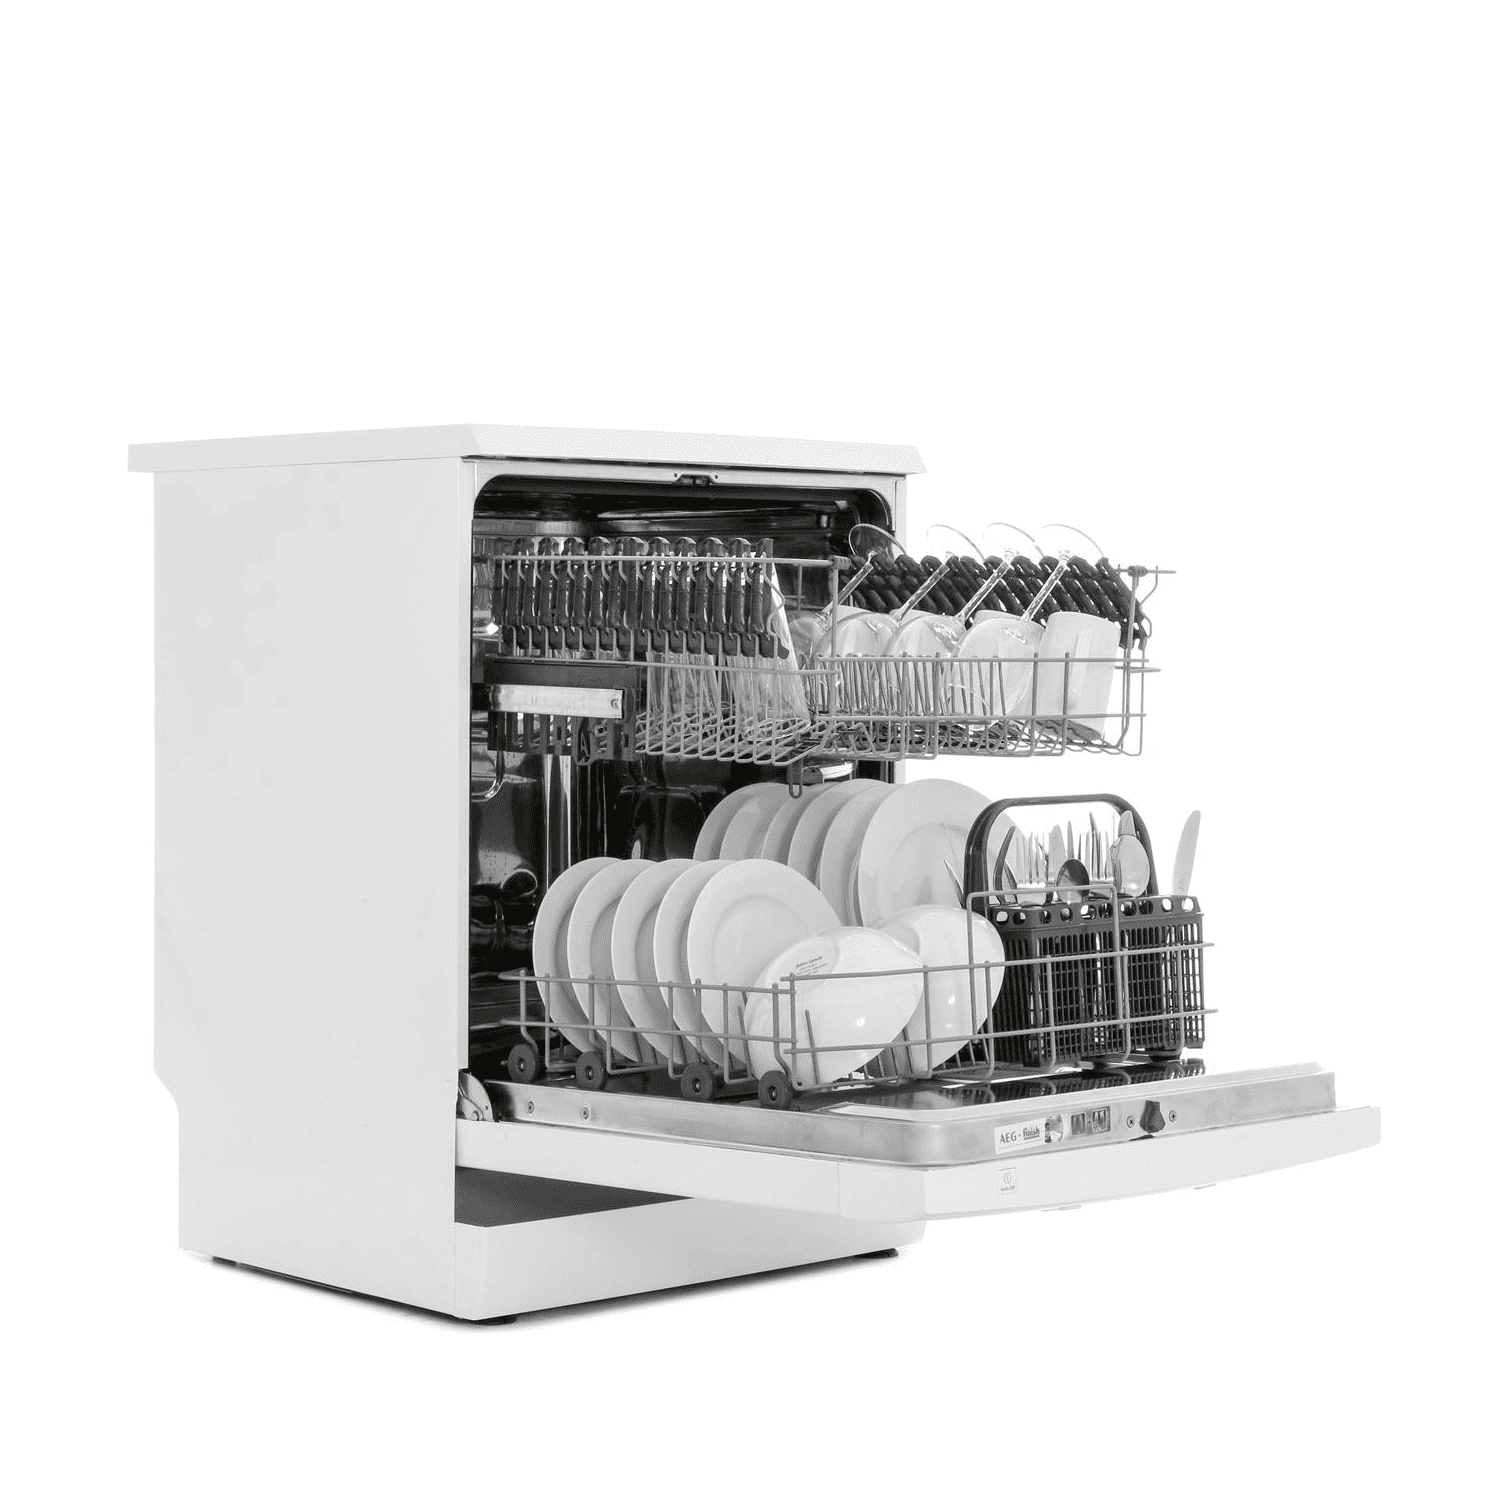 AEG FFB41600ZW FREE STANDING DISHWASHER WITH AIRDRY TECHNOLOGY - 2